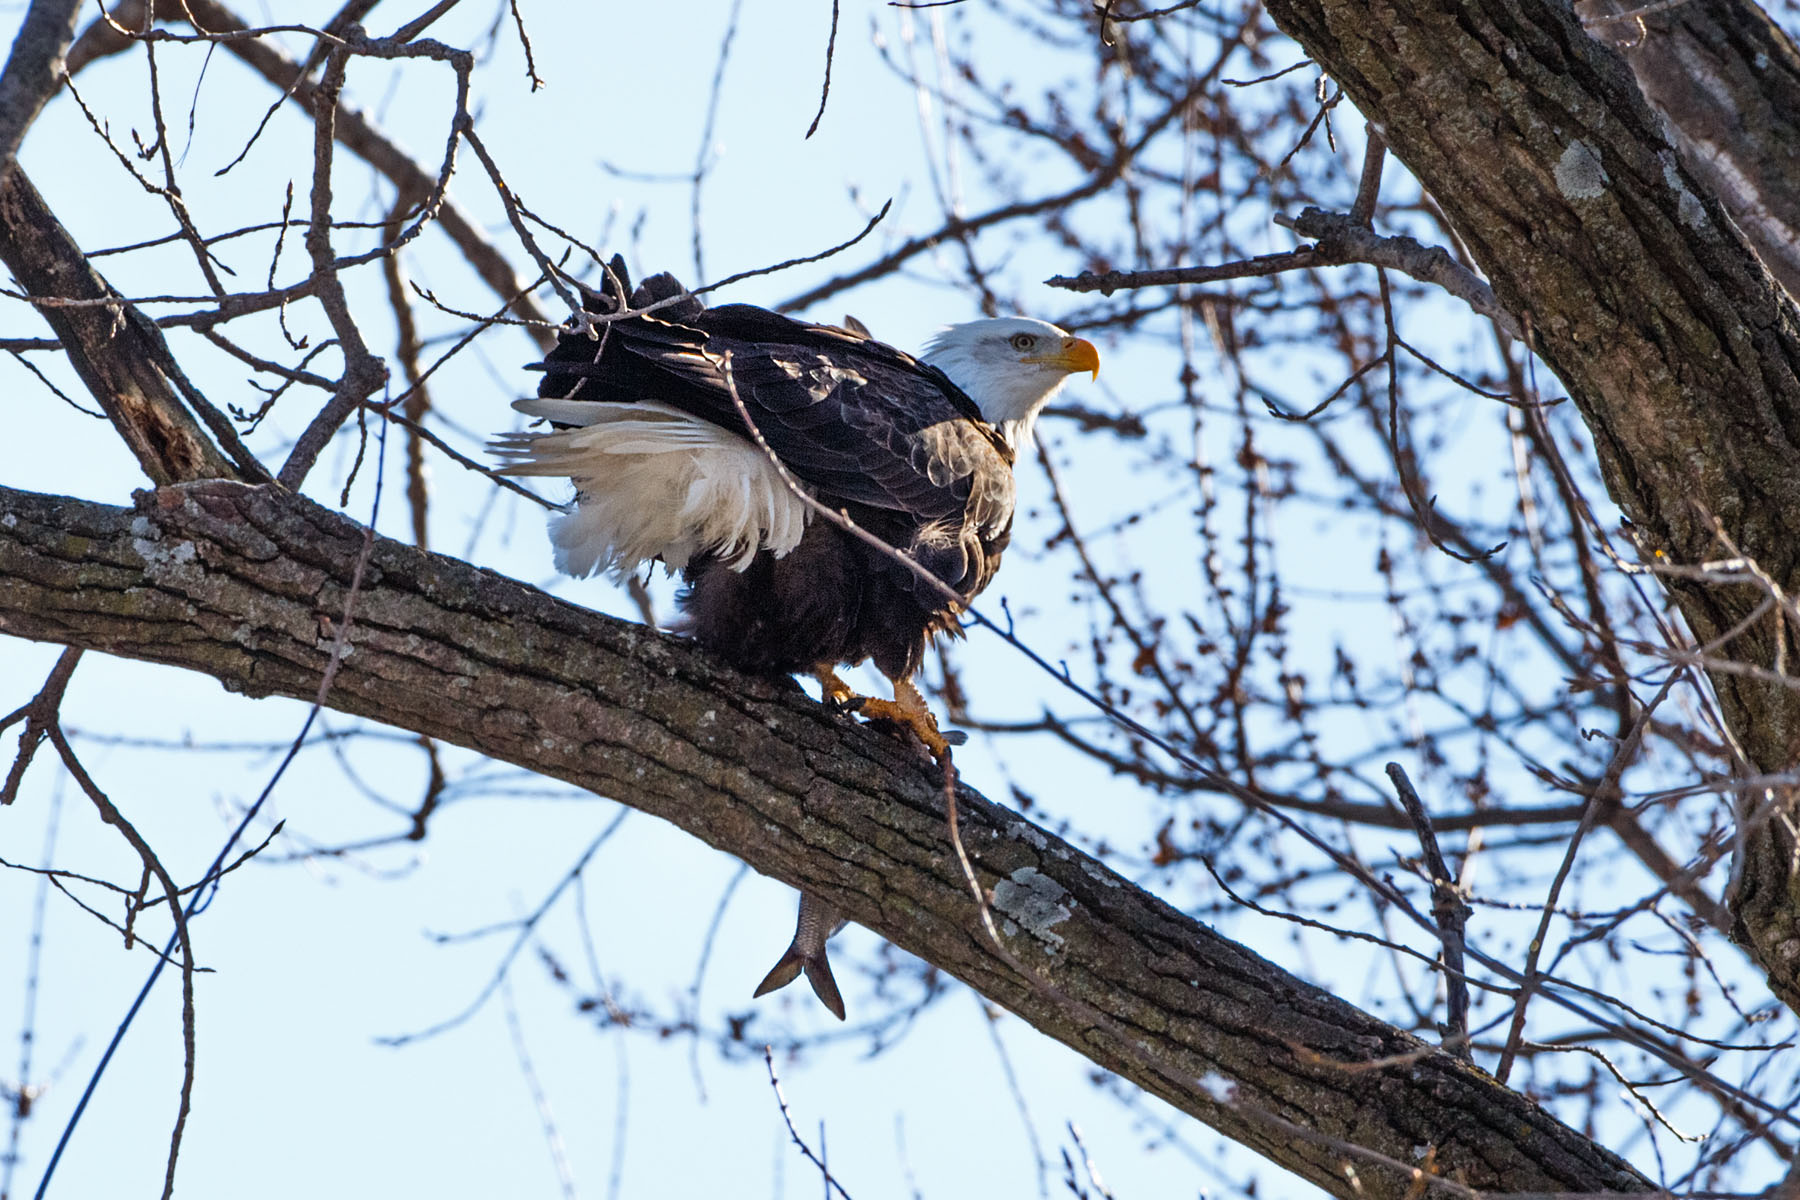 Bald eagle with fish, Lock and Dam 18 on the Mississippi River in Illinois.  Click for next photo.